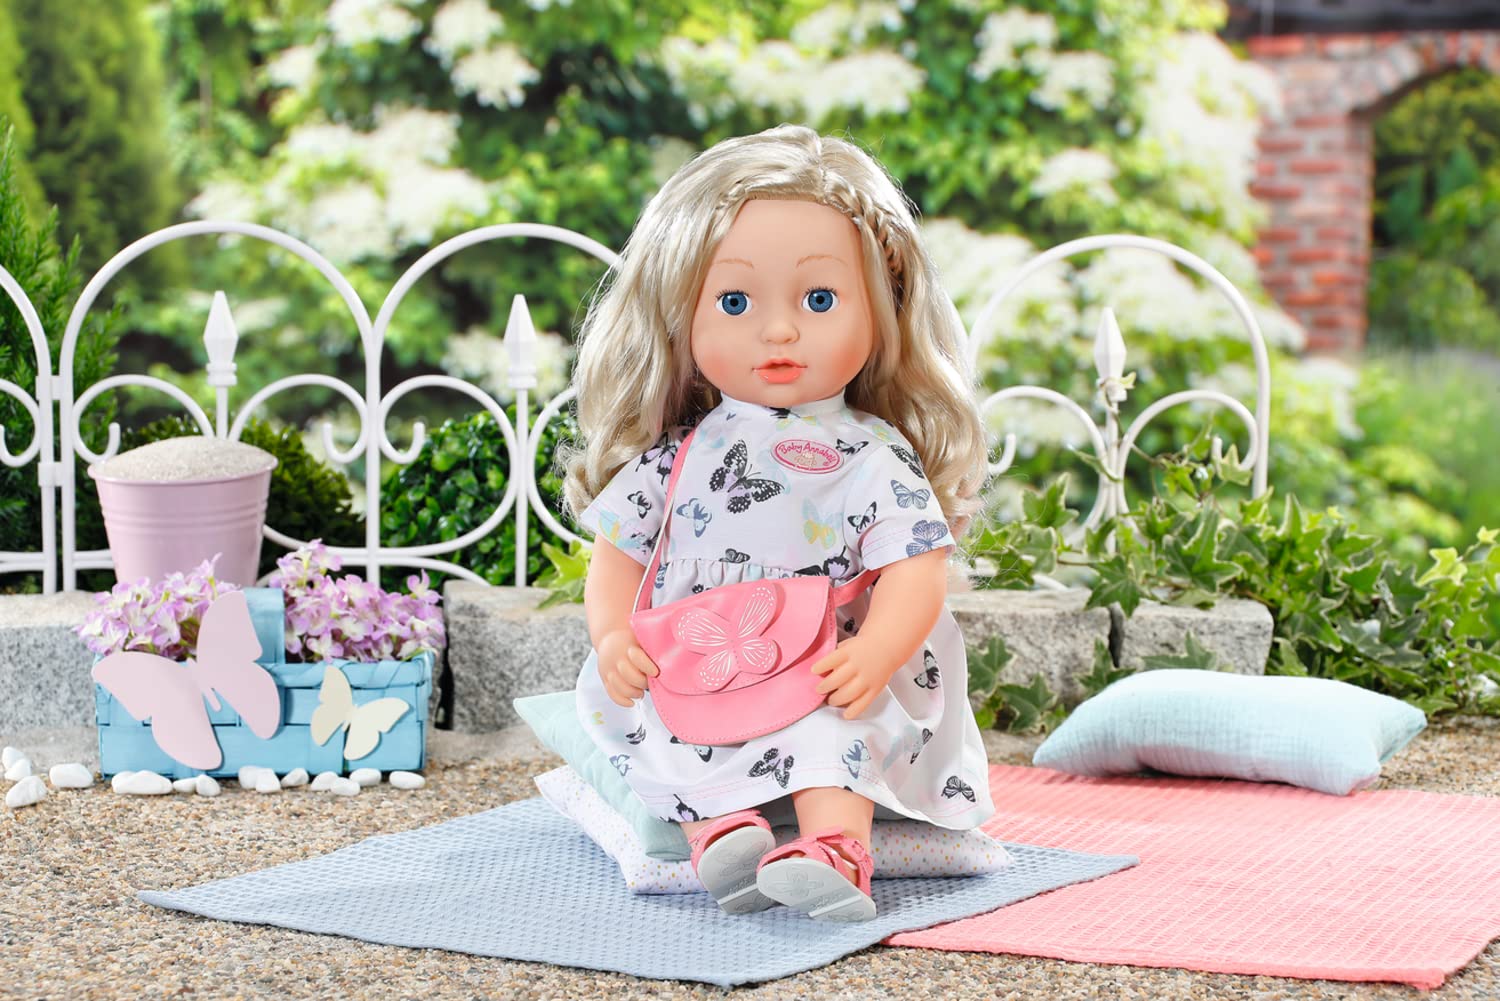 Baby Annabell Deluxe Butterfly Dress - to Fit 43cm Baby Annabell Dolls - Deluxe Set Includes Beautiful Dress, Bag, Sandals and Clothes Hanger - Suitable for Children Aged 3+ Years - 706701